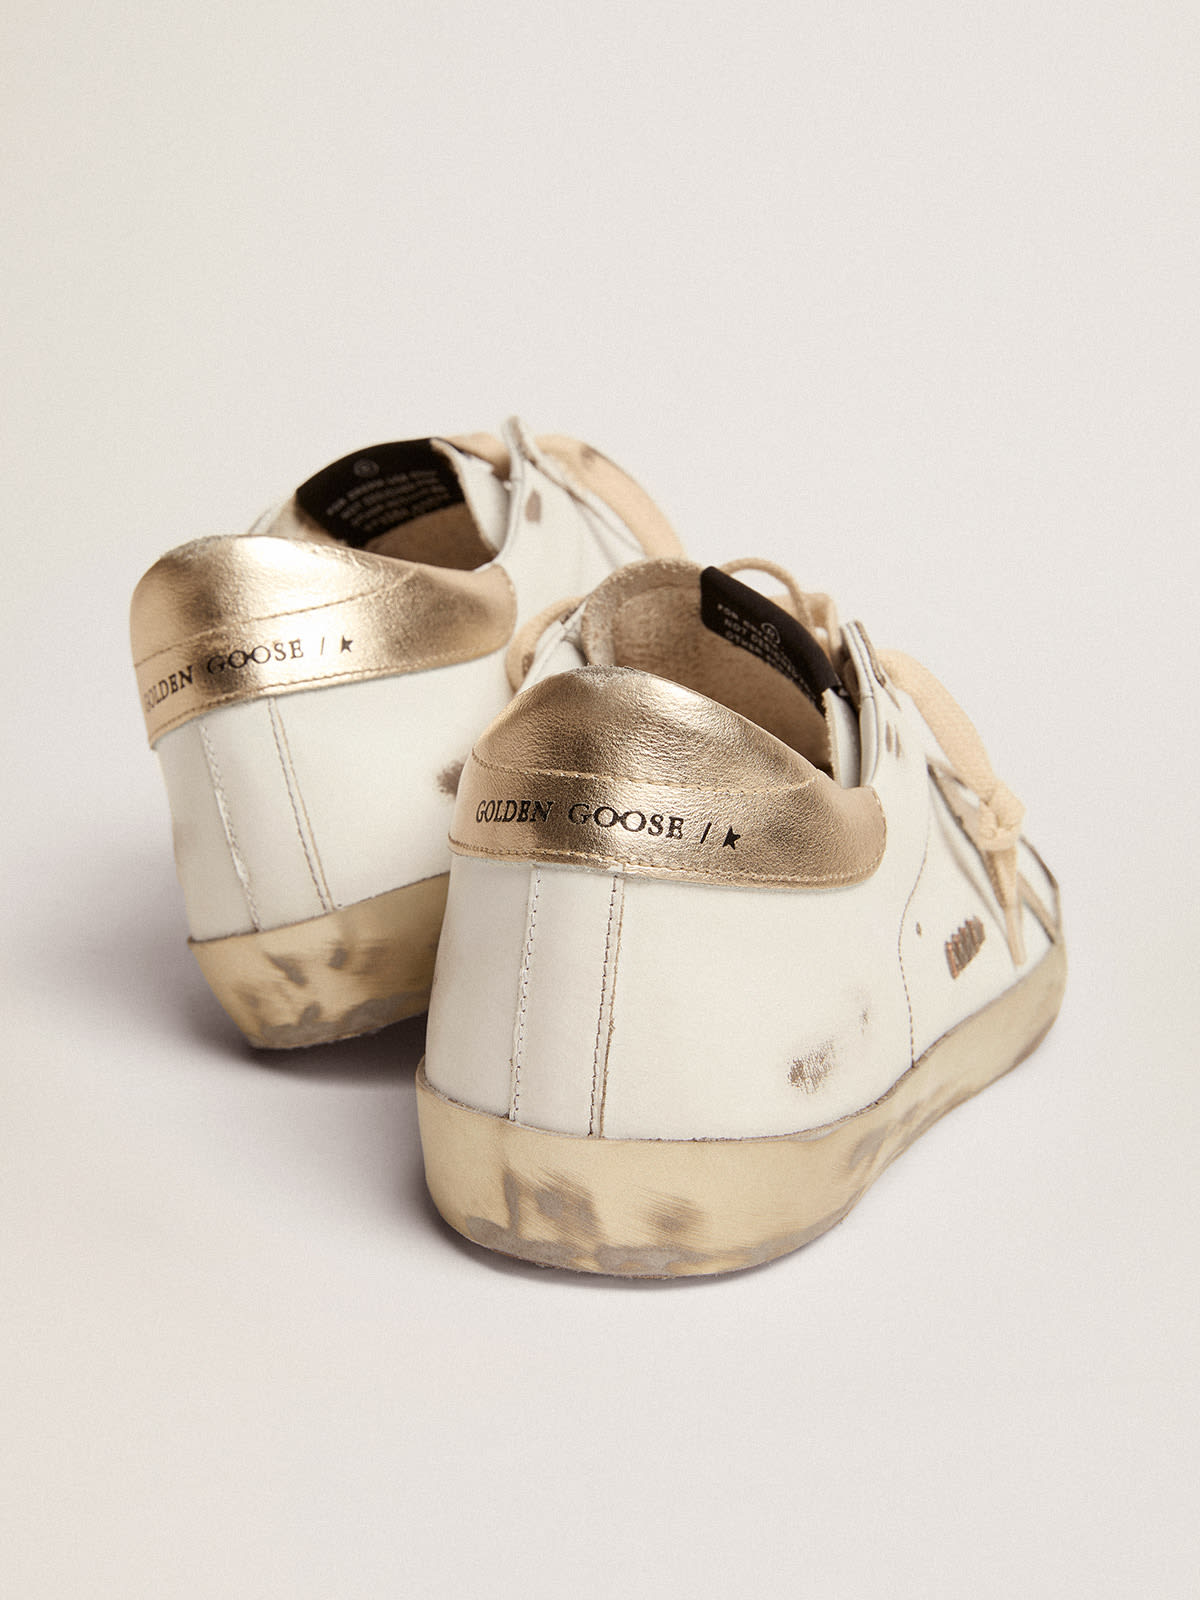 Golden Goose - Men’s Super-Star sneakers with gold sparkle foxing and metal stud lettering in 